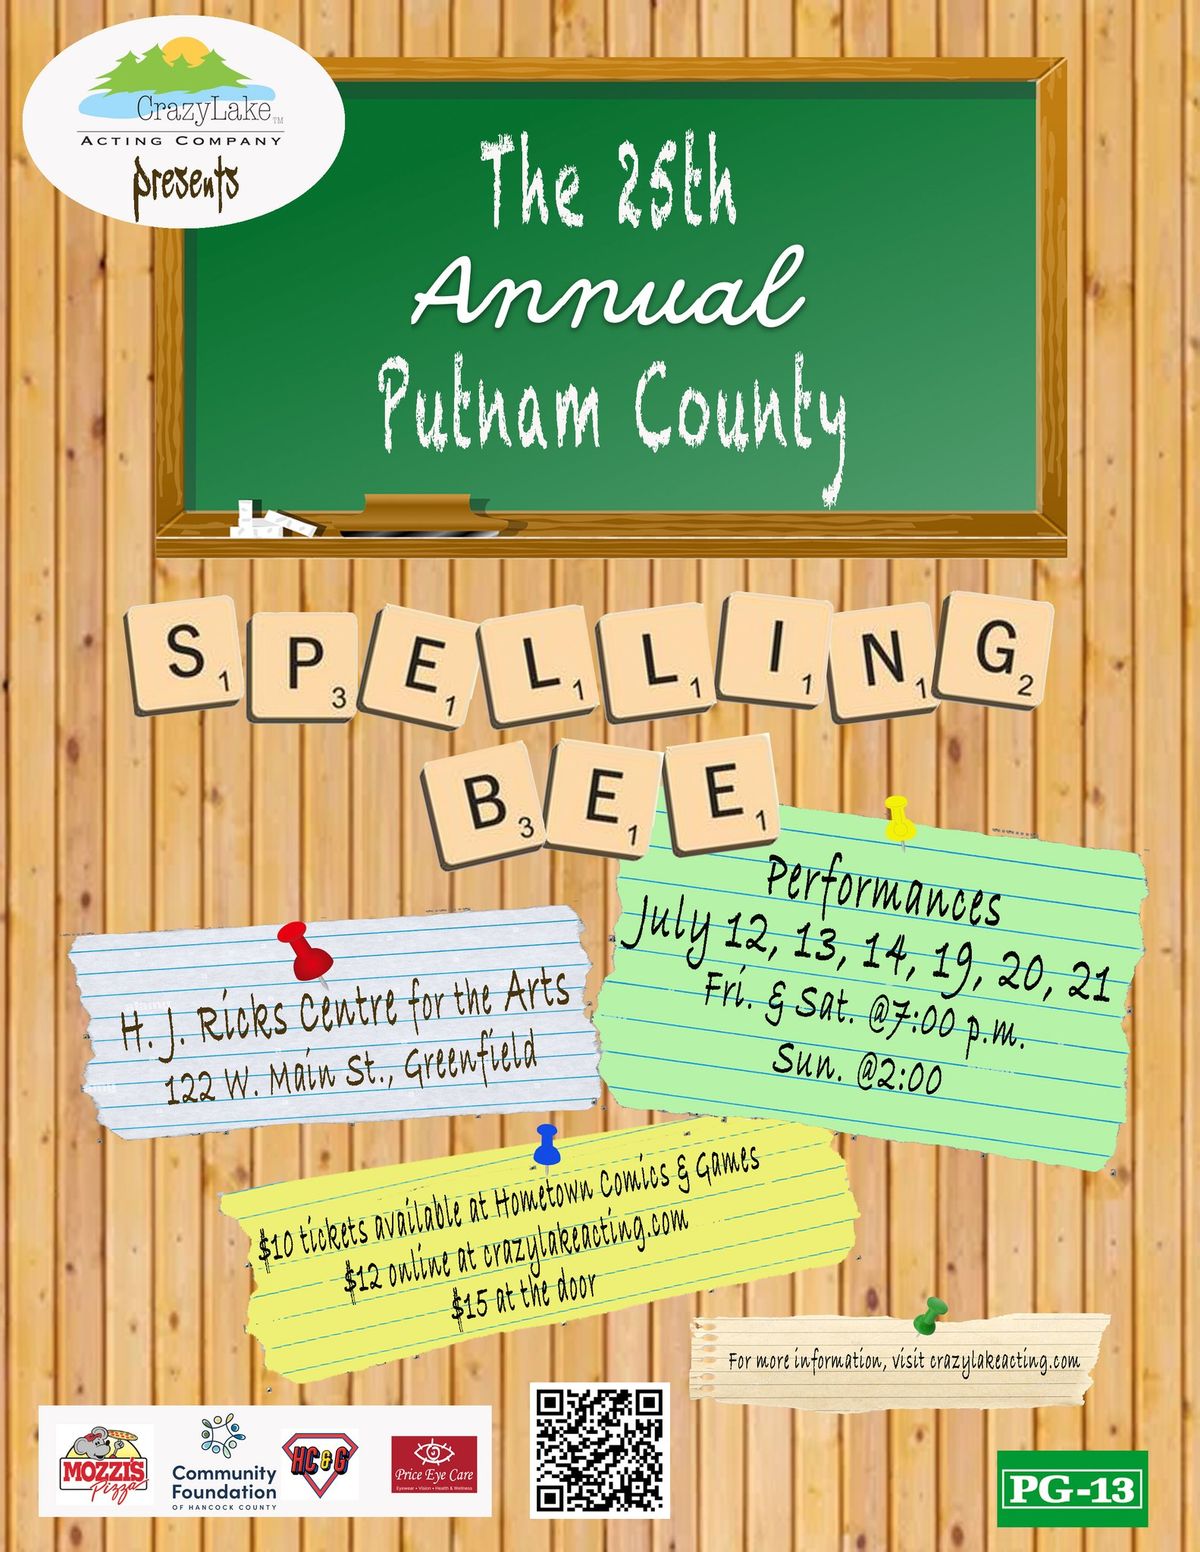 "The 25th Annual Putnam County Spelling Bee"